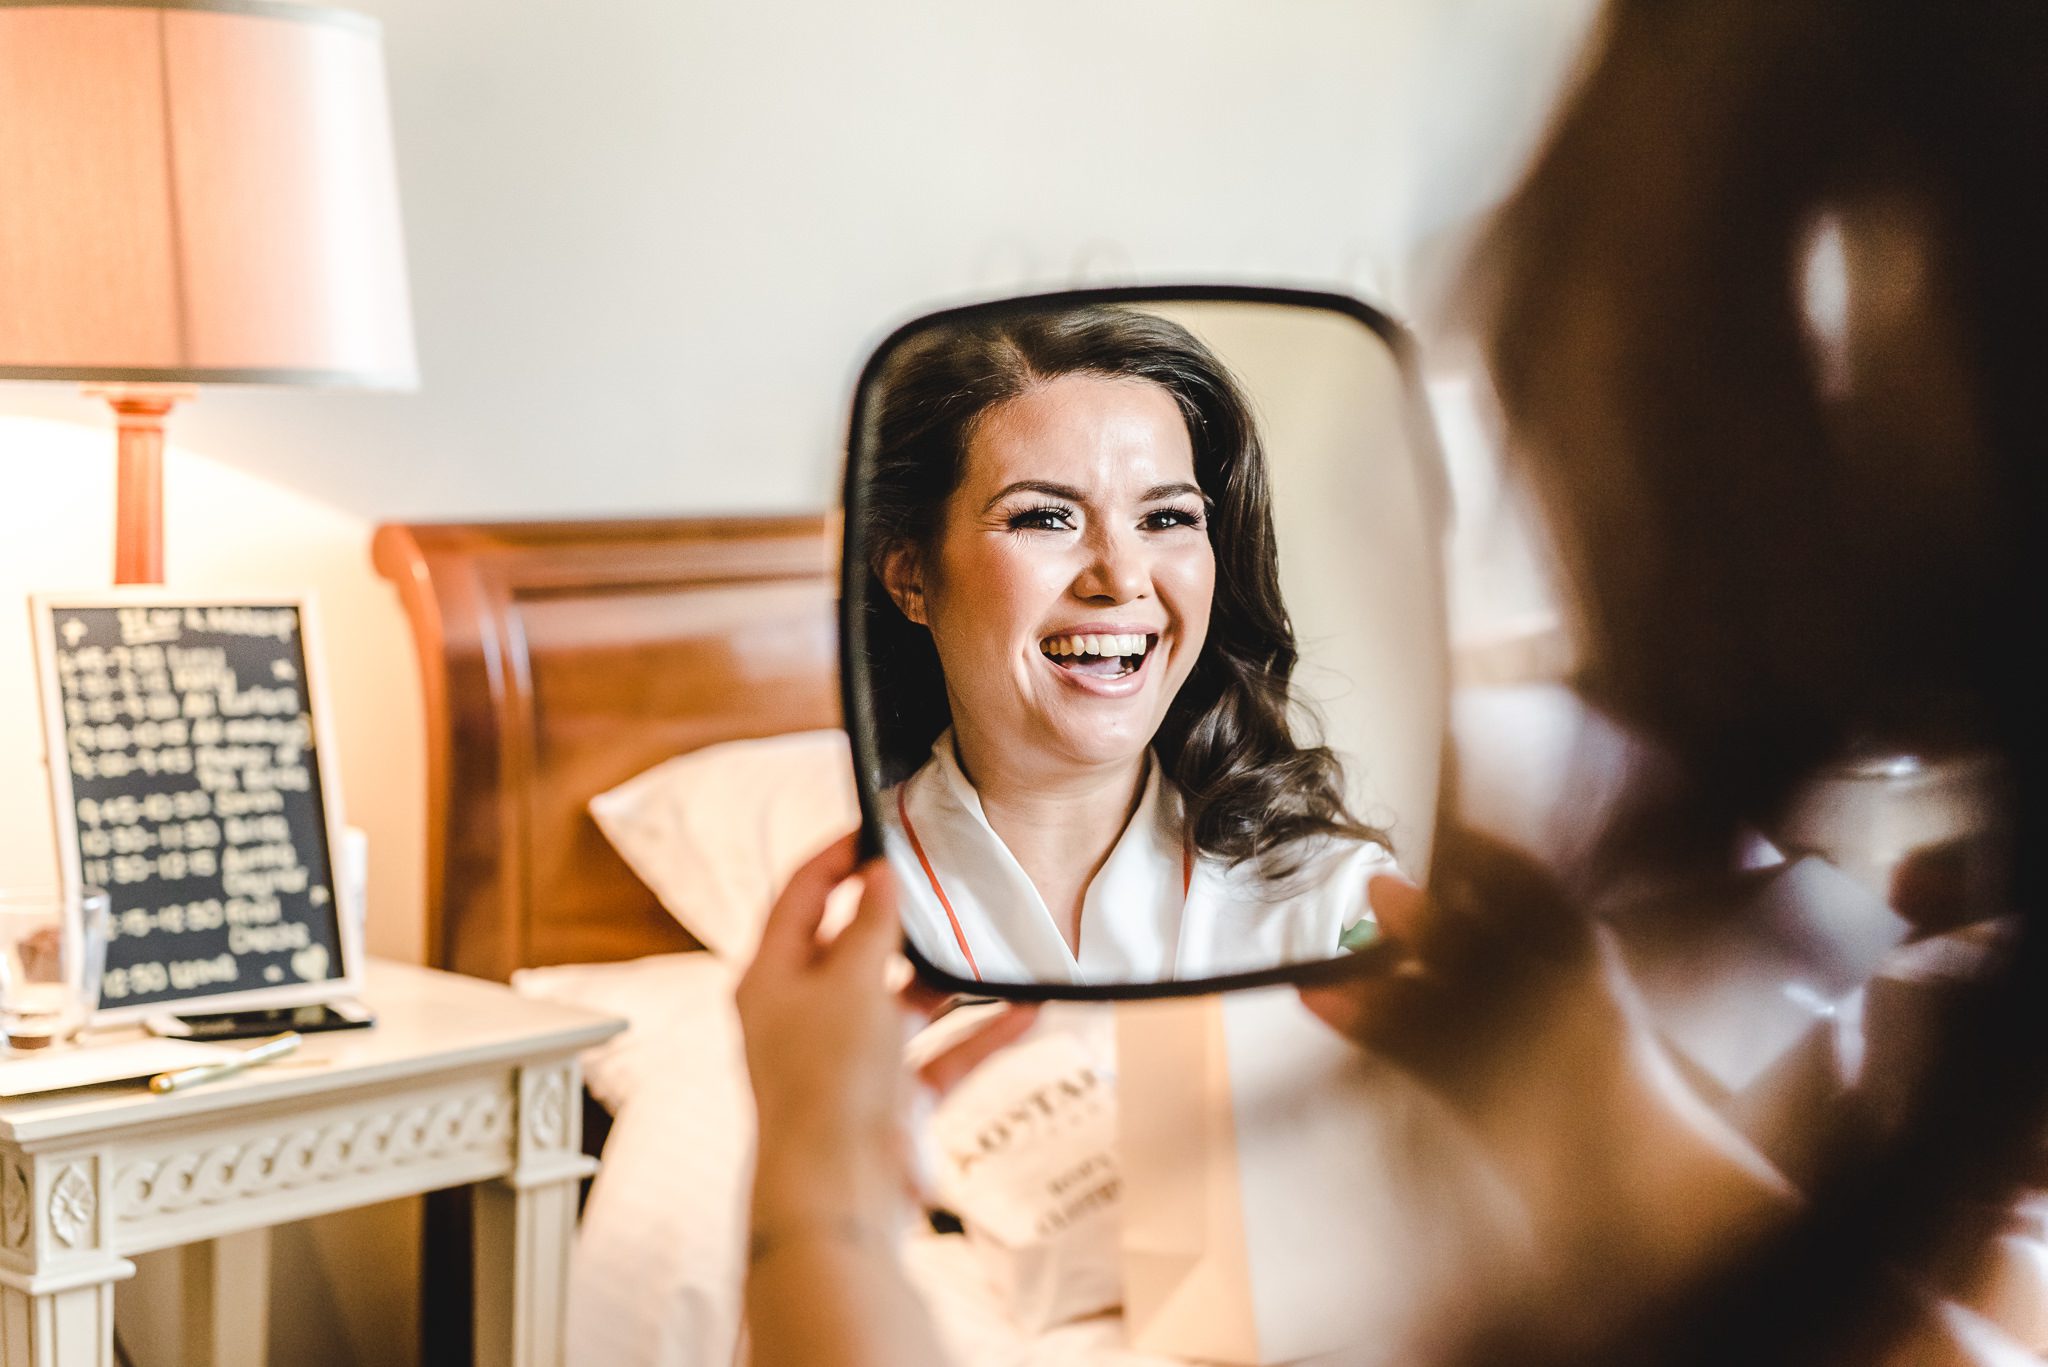 A Stone Barn bride smiling into a mirror before her wedding